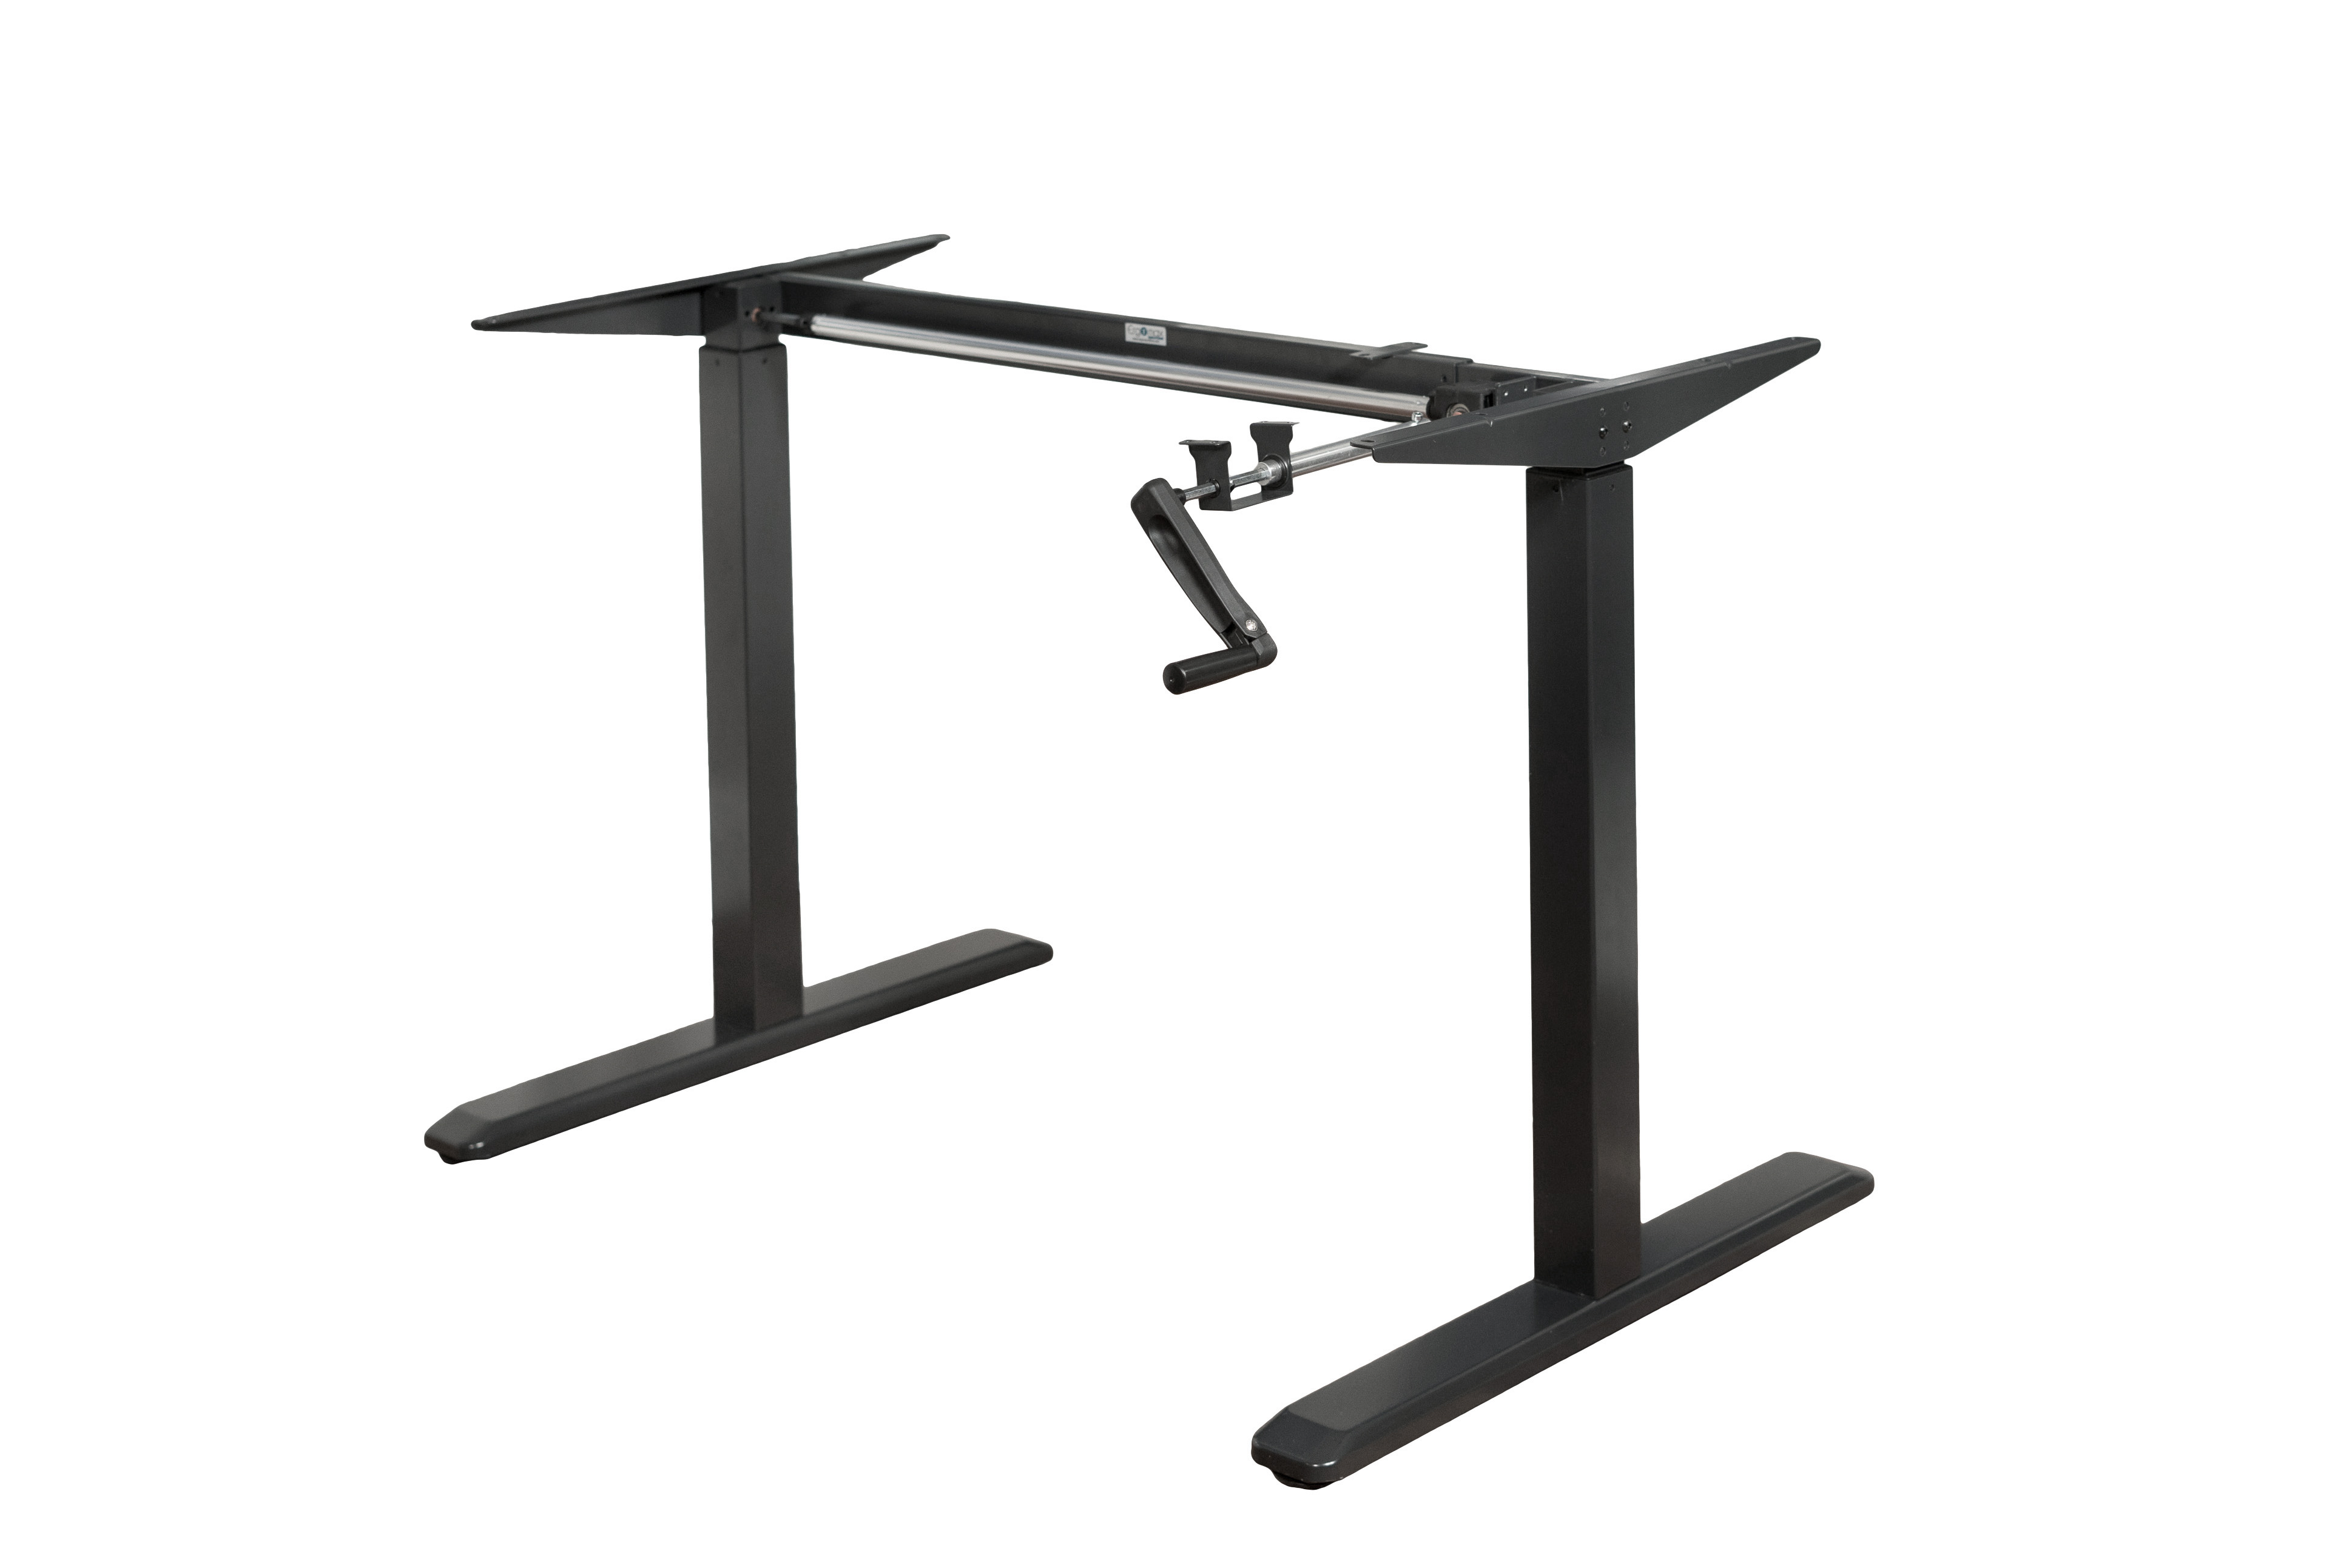 ErgoMax Black Height Adjustable Crank Desk Frame, Tabletop Not Included, 45 Inch Max Height - image 1 of 8